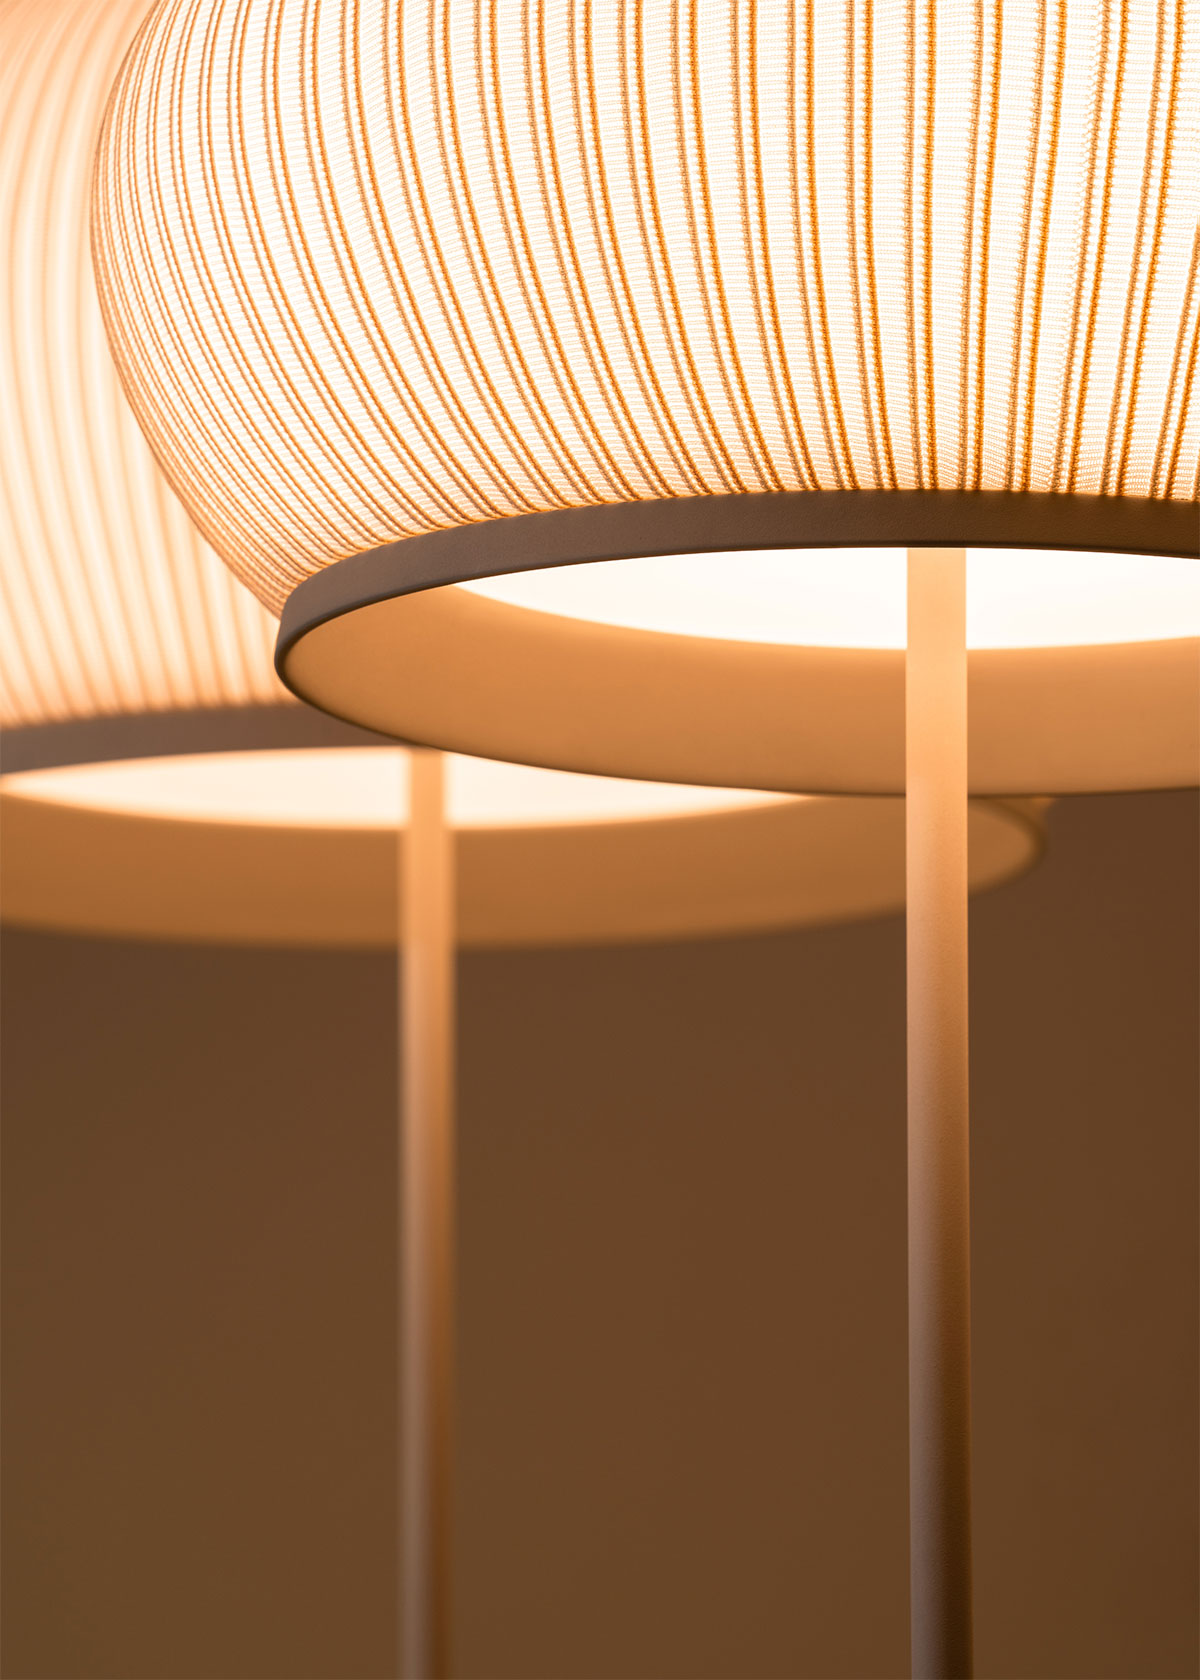 Vibia The Edit - Knit Focus on Materiality